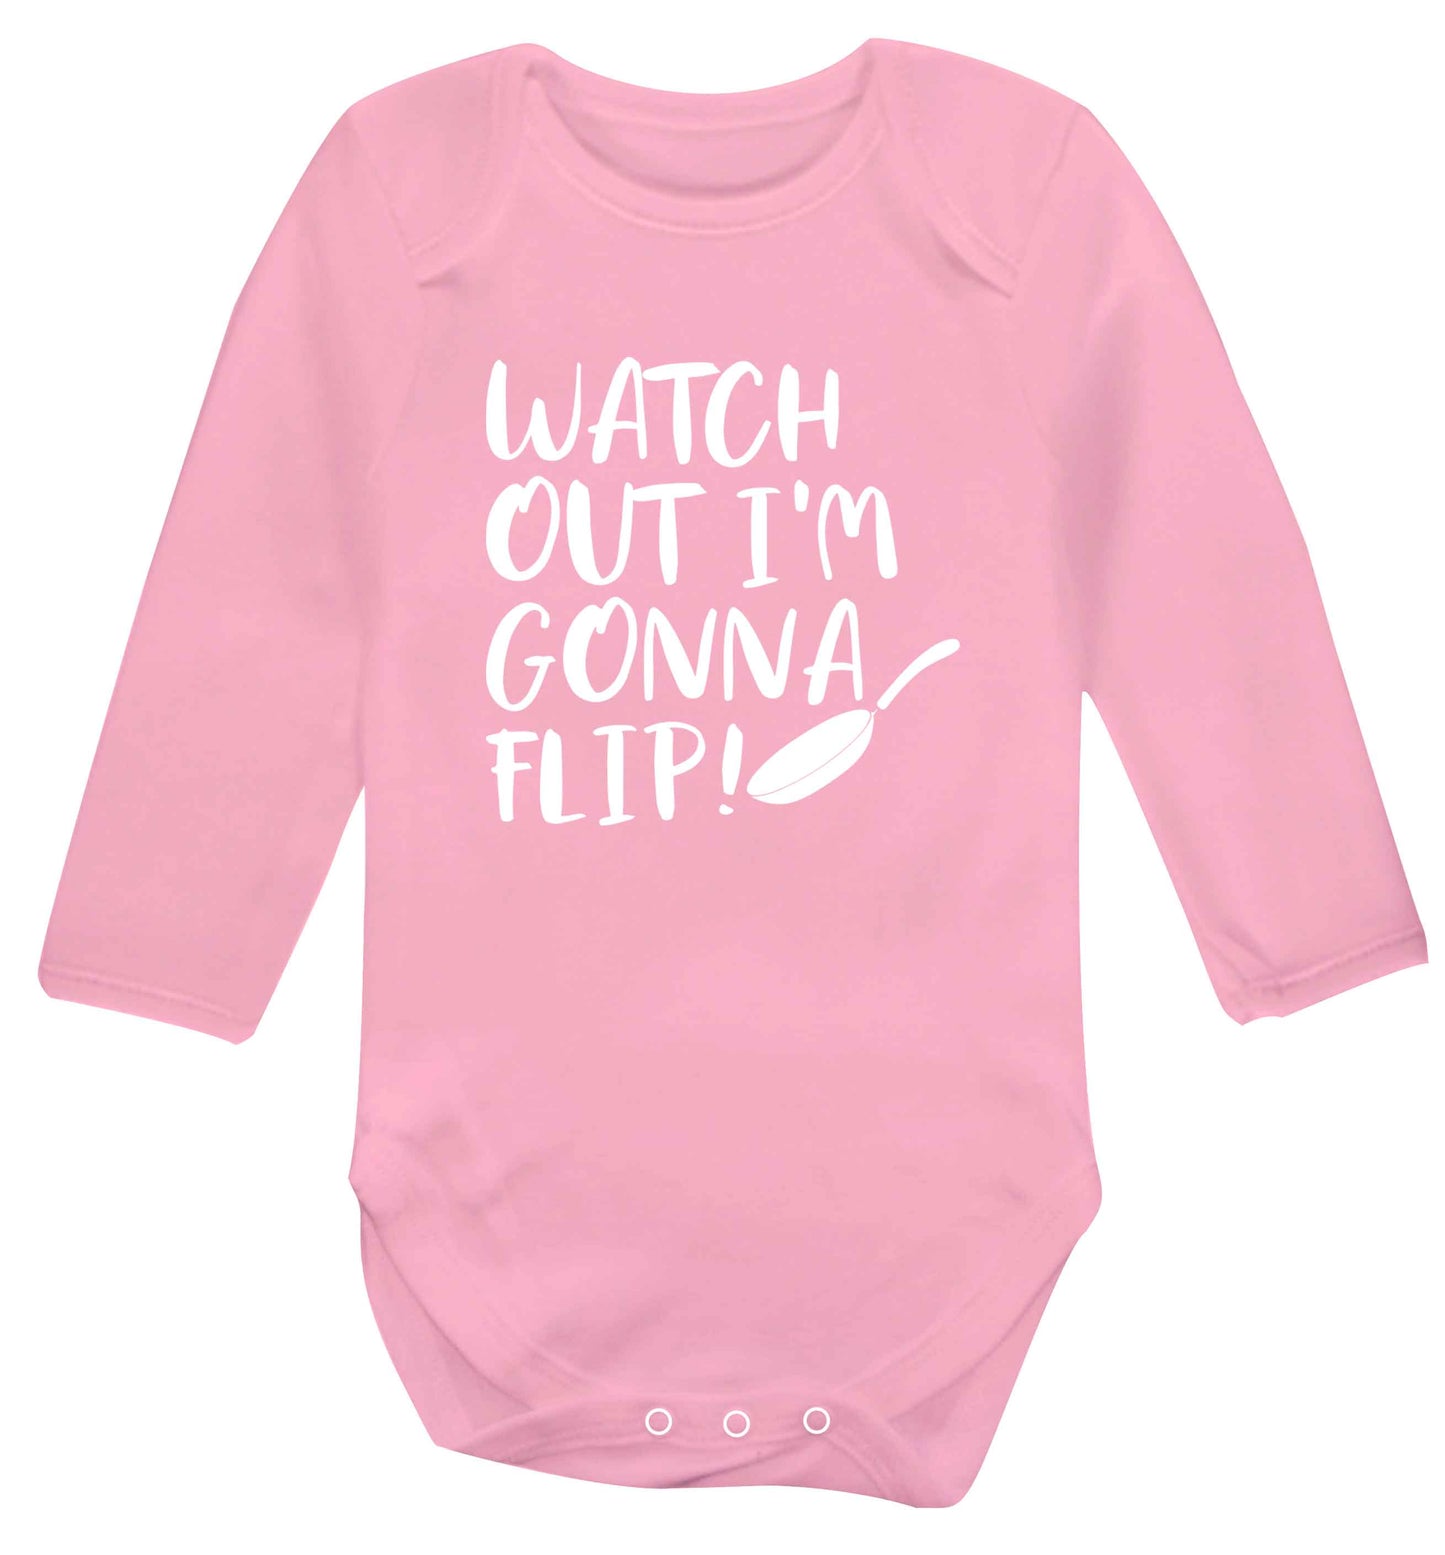 Watch out I'm gonna flip! baby vest long sleeved pale pink 6-12 months